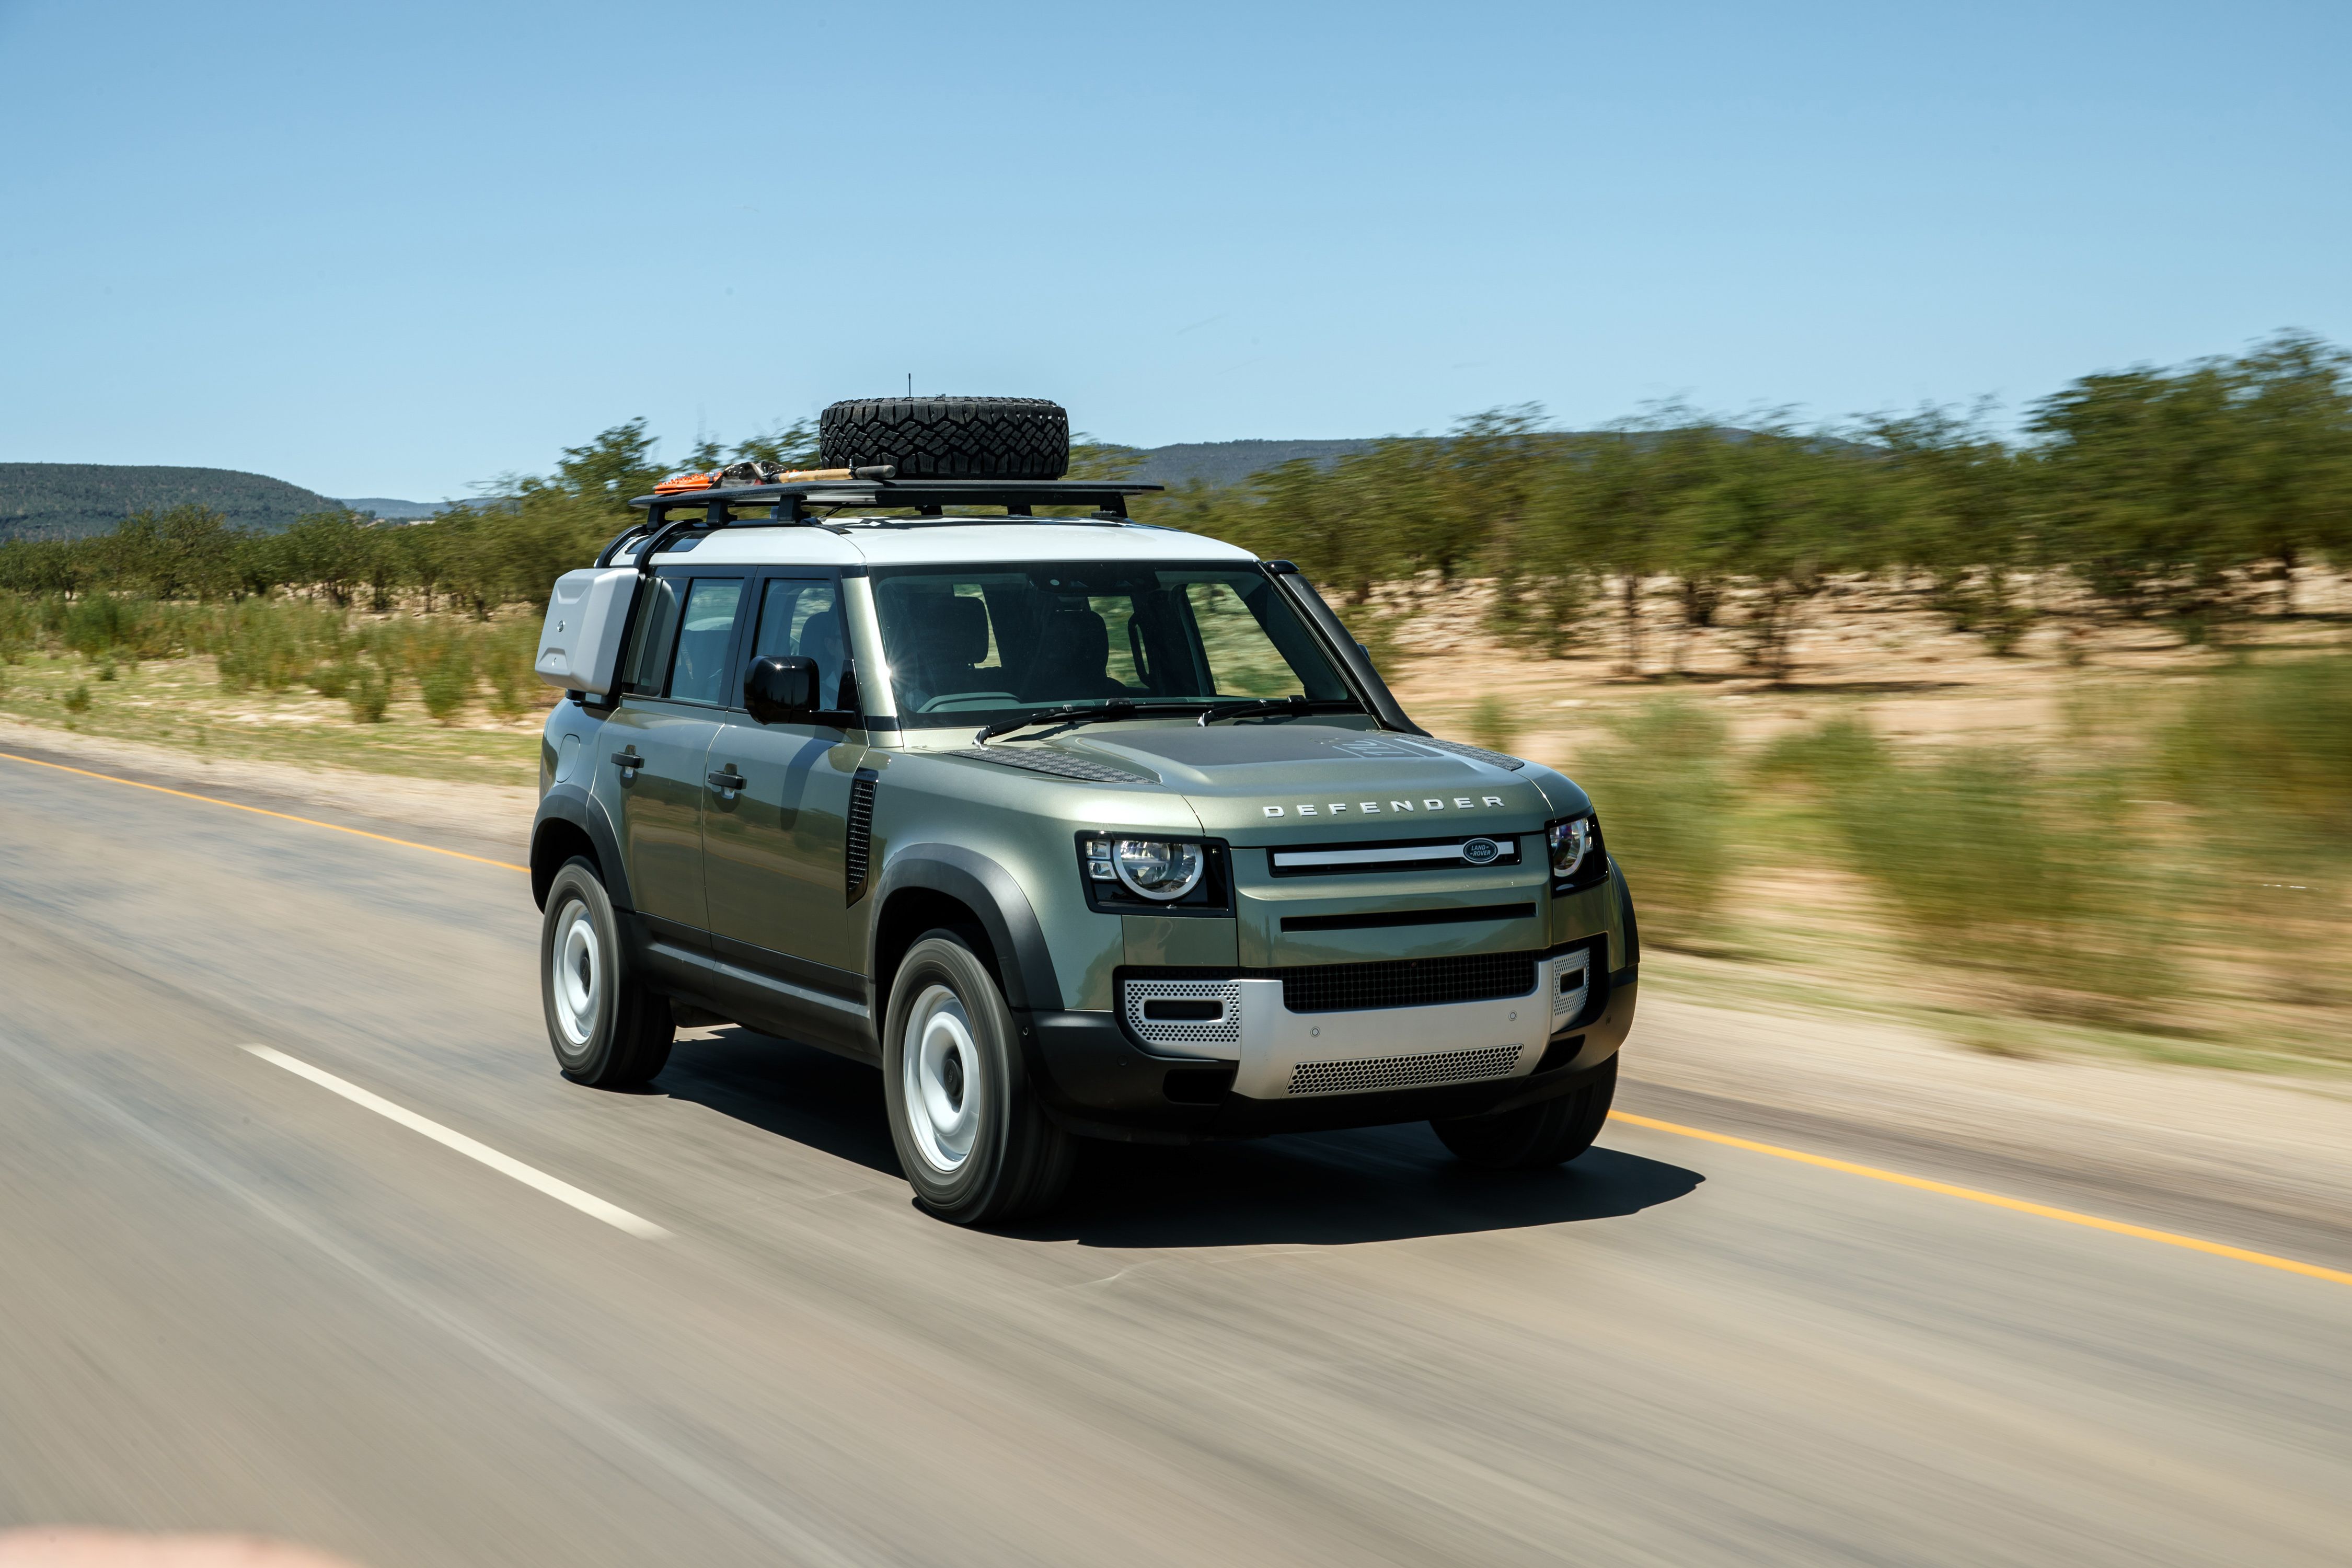 2020 Land Rover Defender first look video